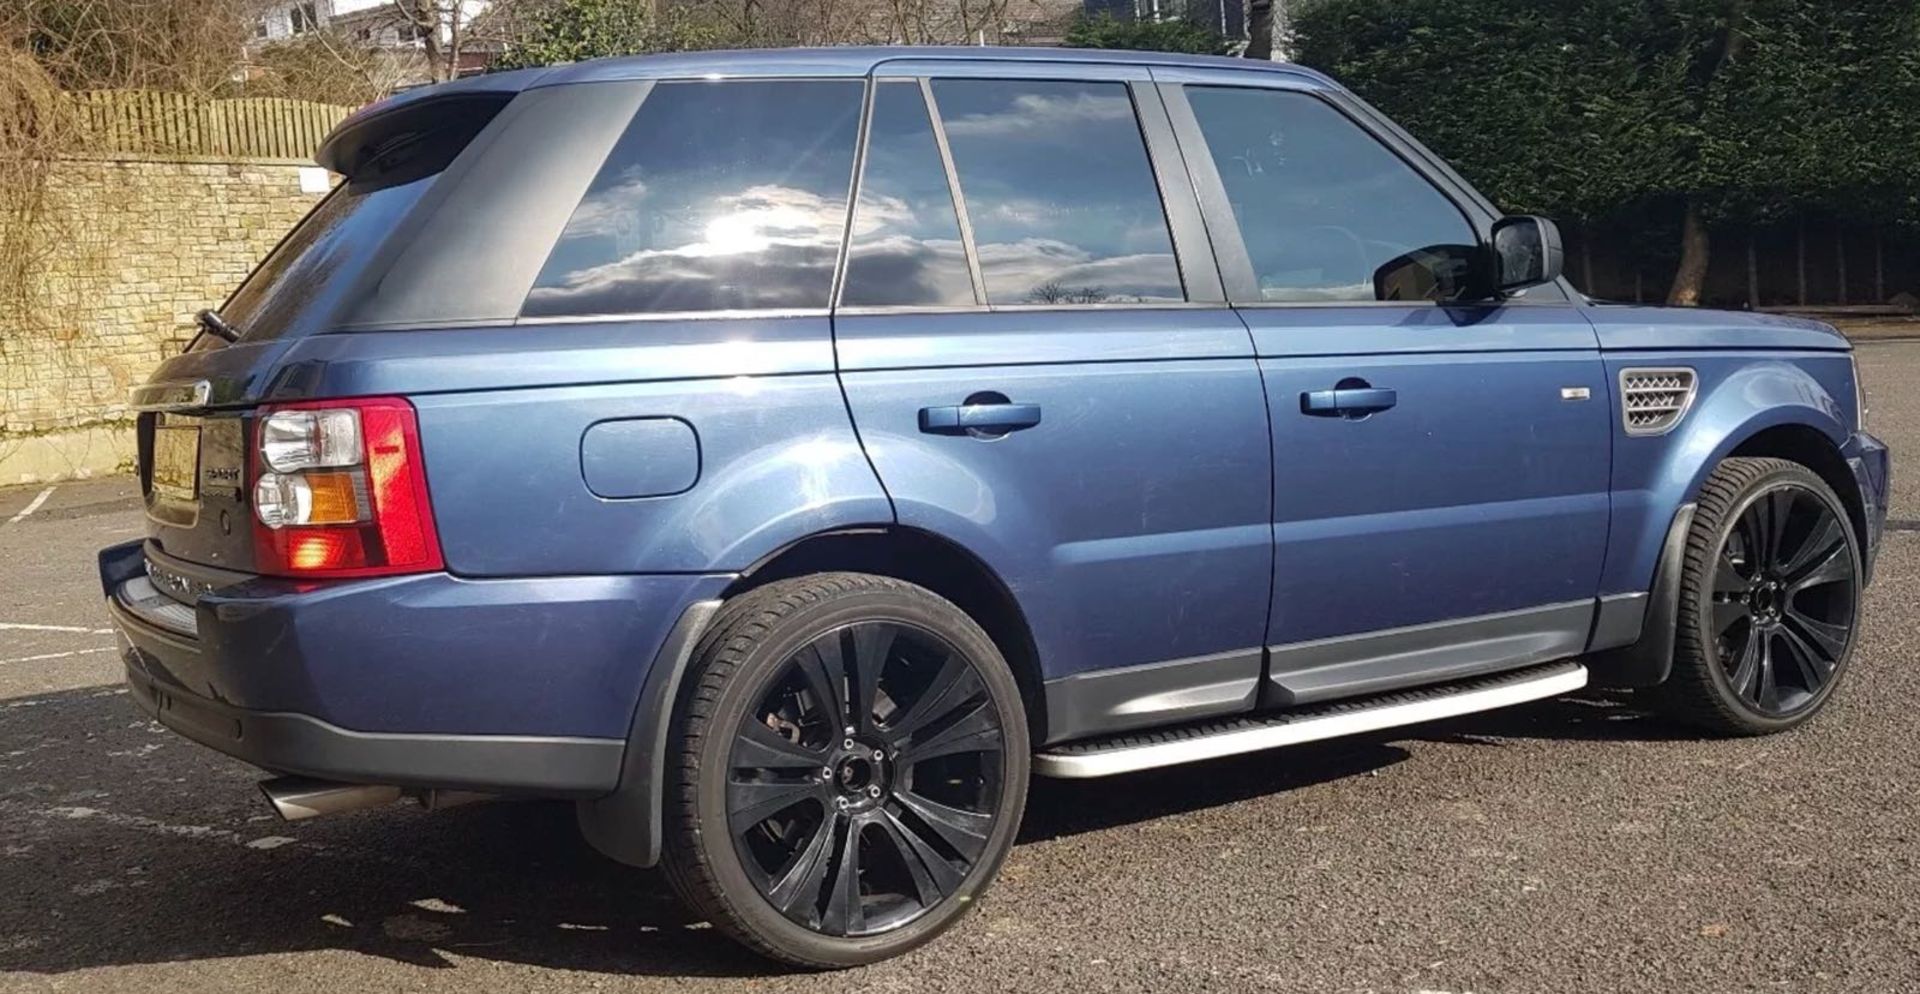 2006/06 REG LAND ROVER RANGE ROVER SPORT V8 SUPER CHARGED STD AUTOMATIC - Image 11 of 11